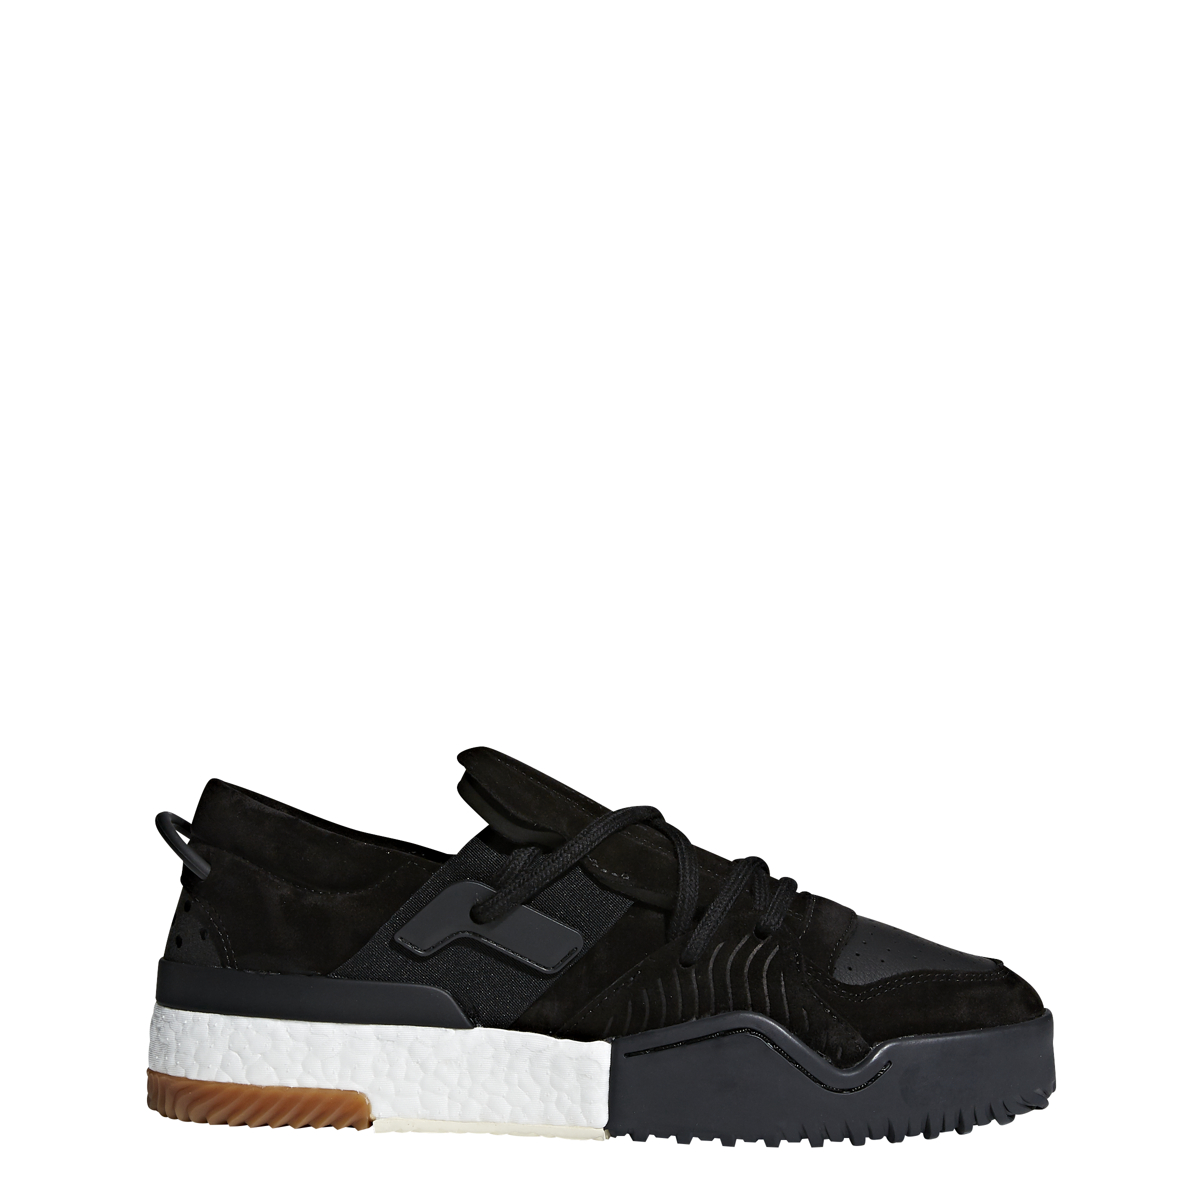 Changes from study Mart Adidas x Alexander Wang AW BBall Lo in Black/White — MAJOR